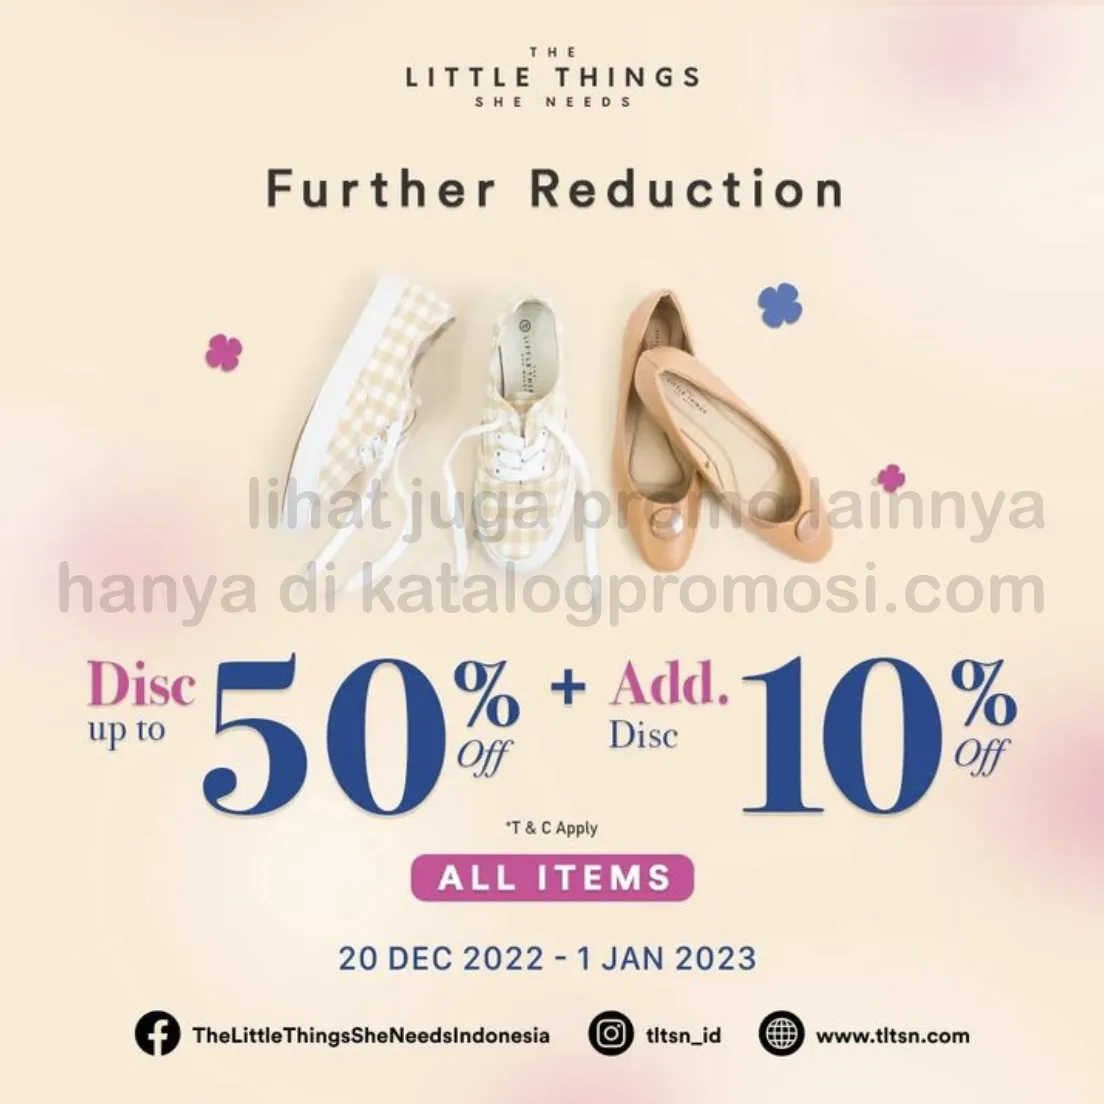 Promo THE LITTLE THINGS SHE NEEDS FURTHER REDUCTION - Disc. Up to 50 % Off + Add. Disc 10 % Off